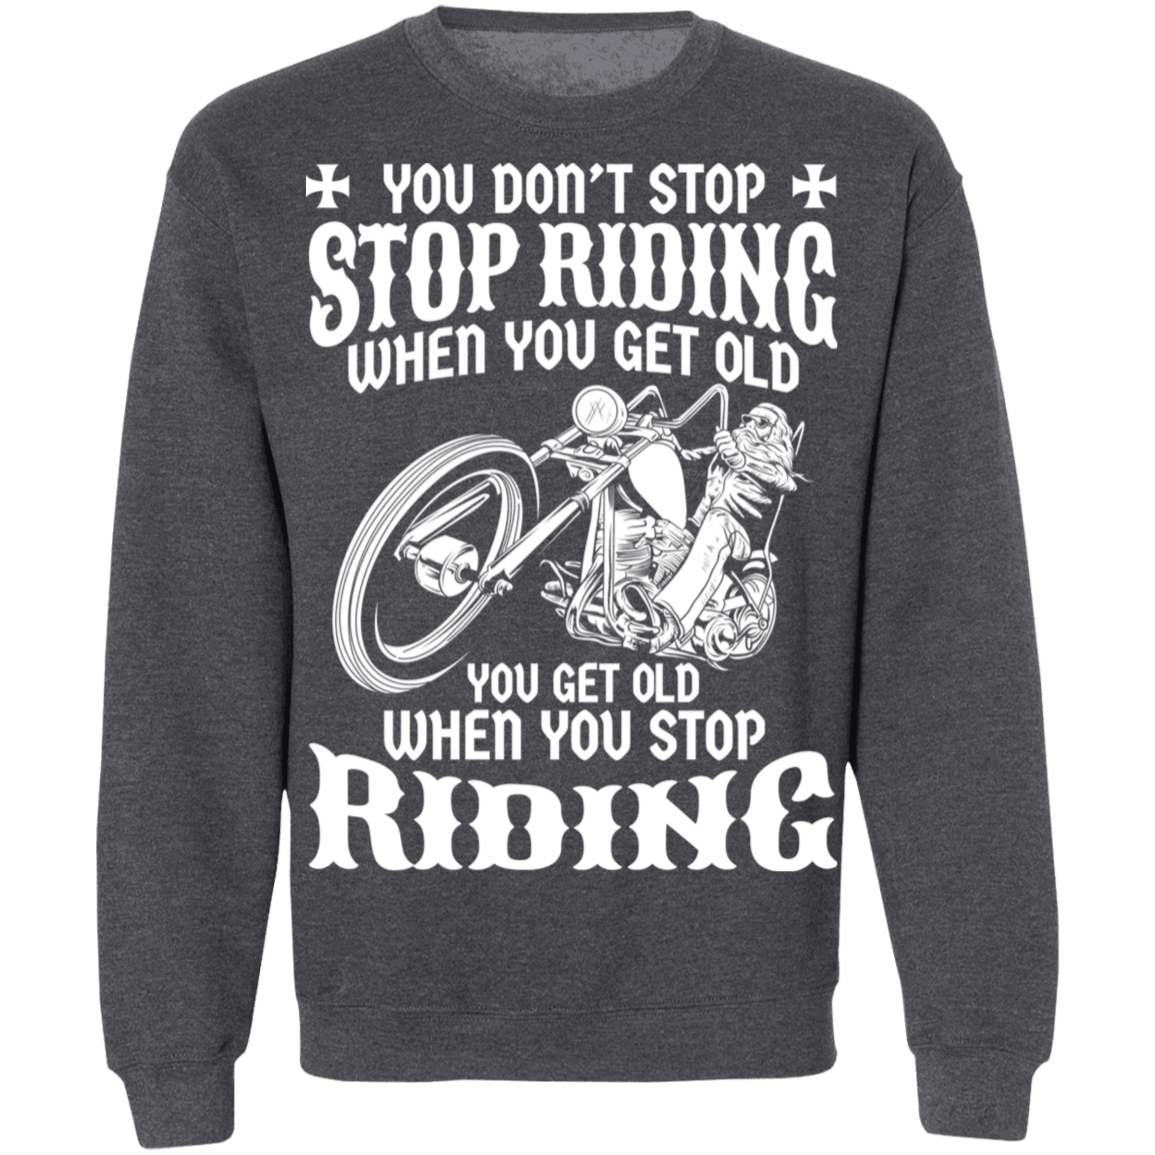 You get old when you stop riding Shirt